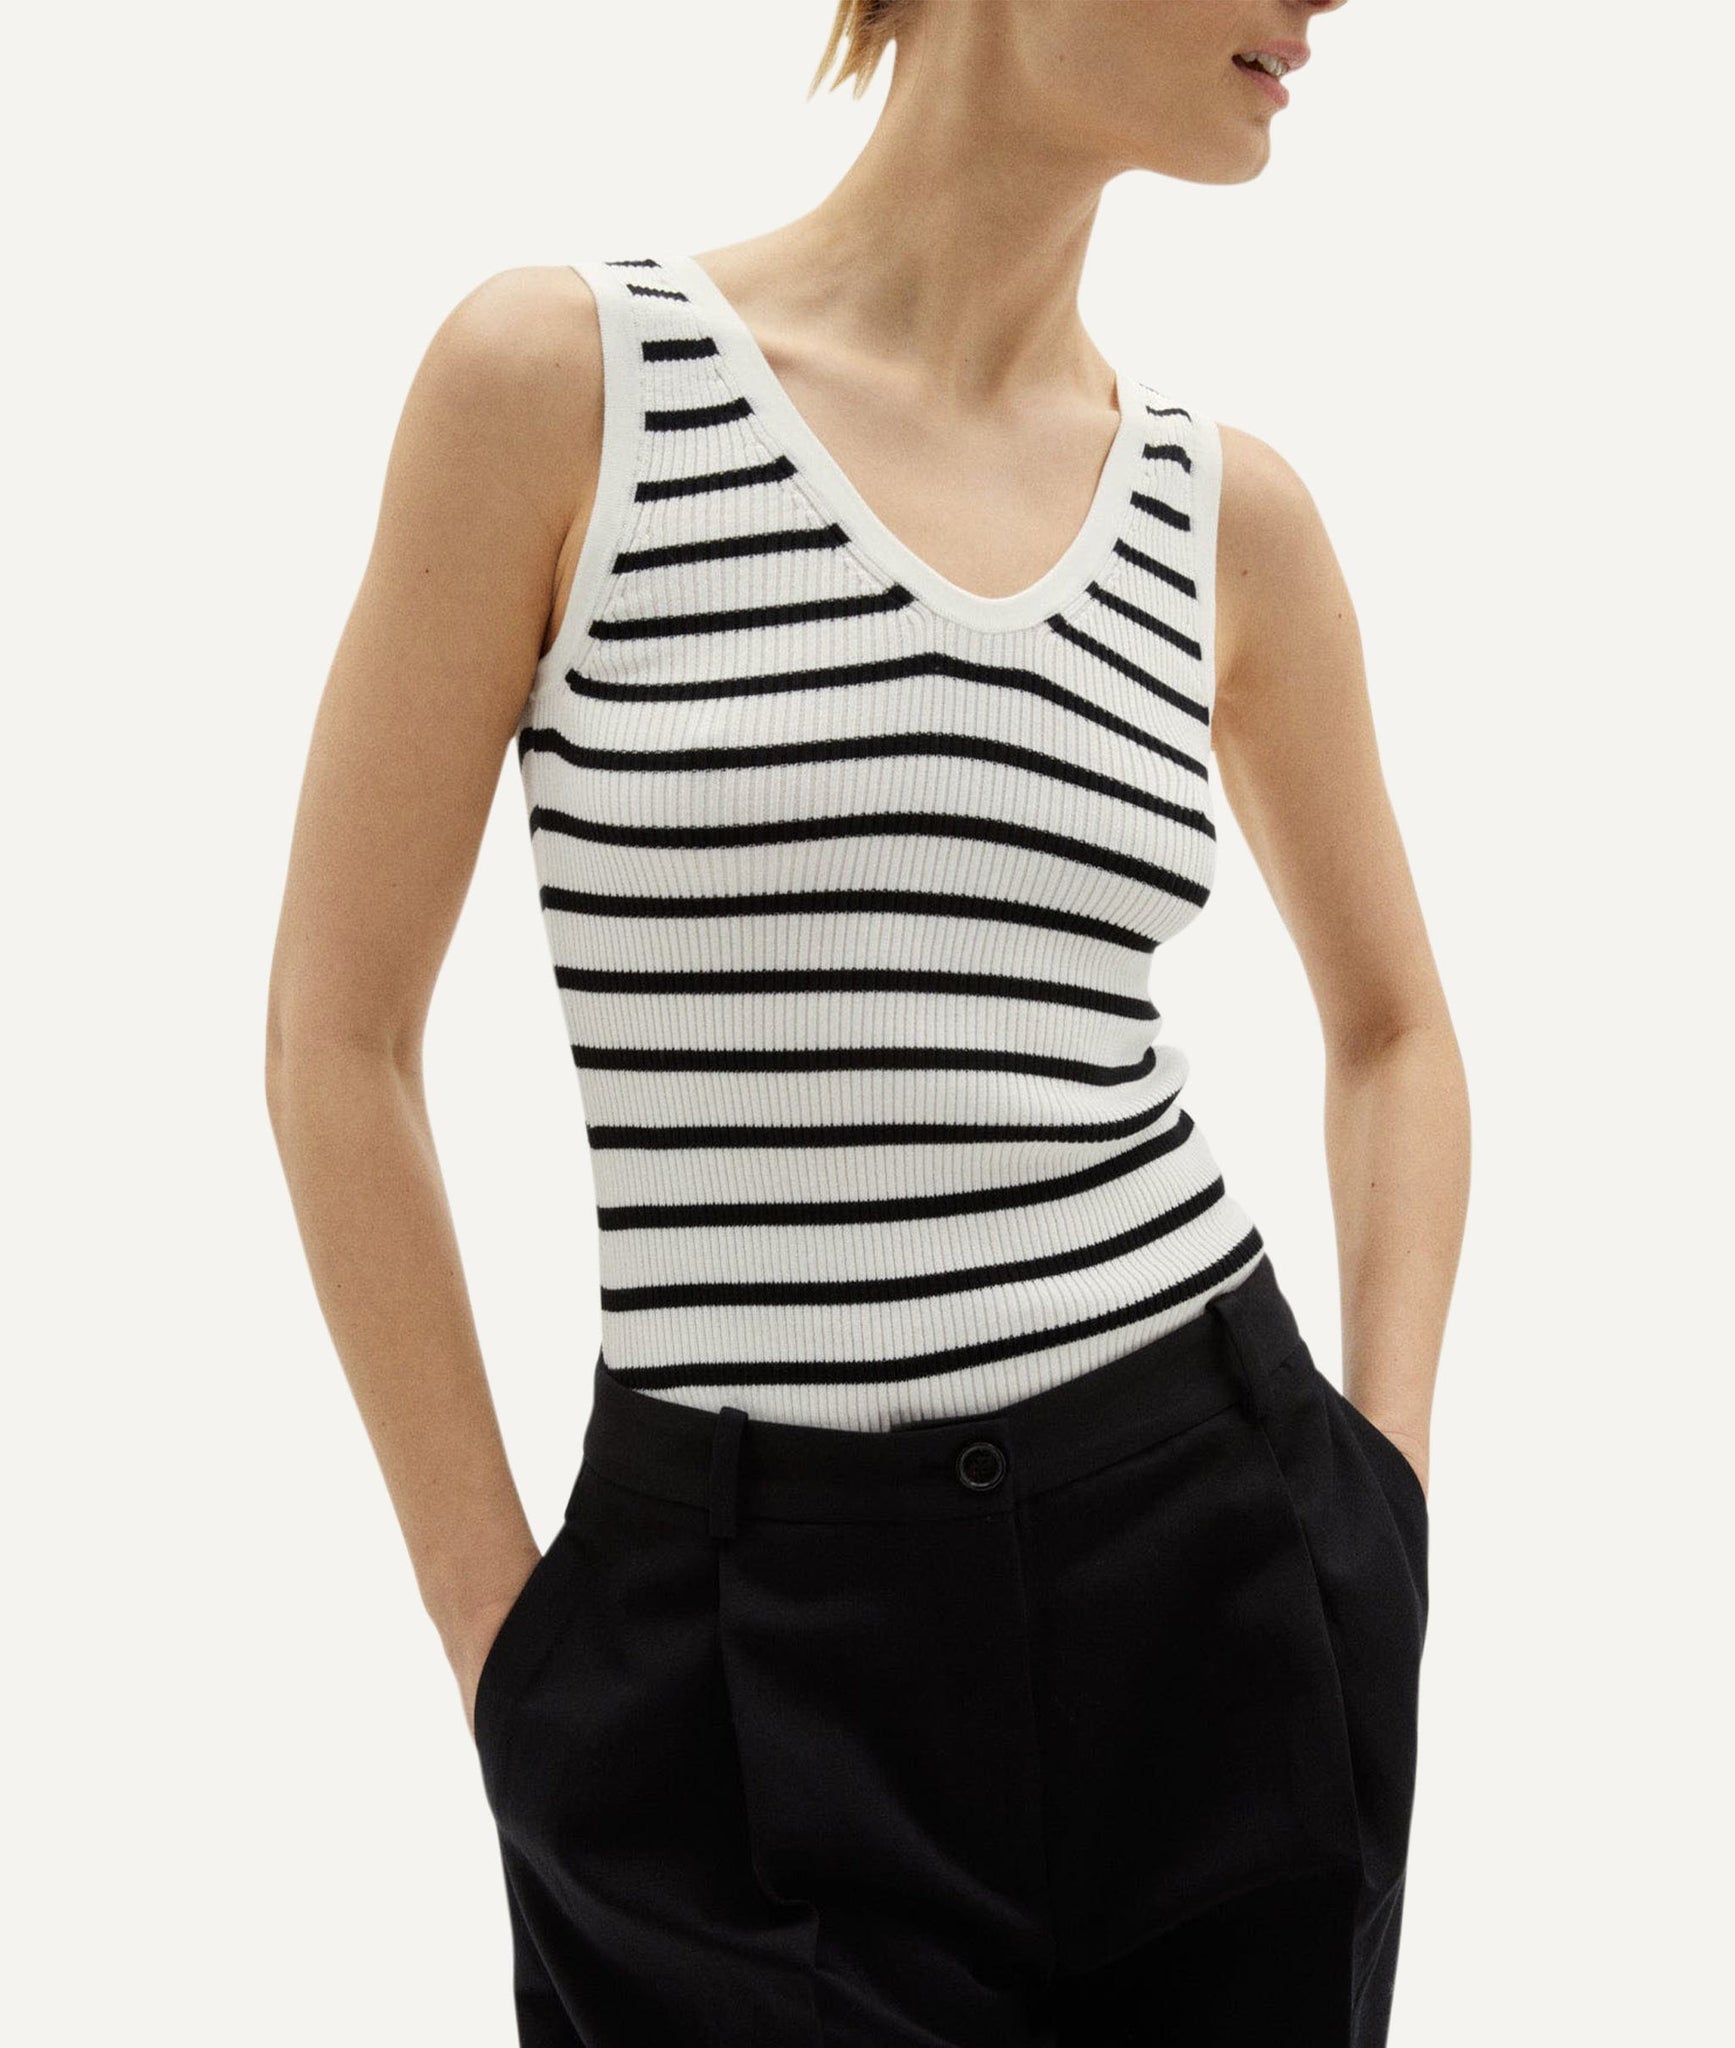 The Organic Cotton Ribbed V-Neck Top